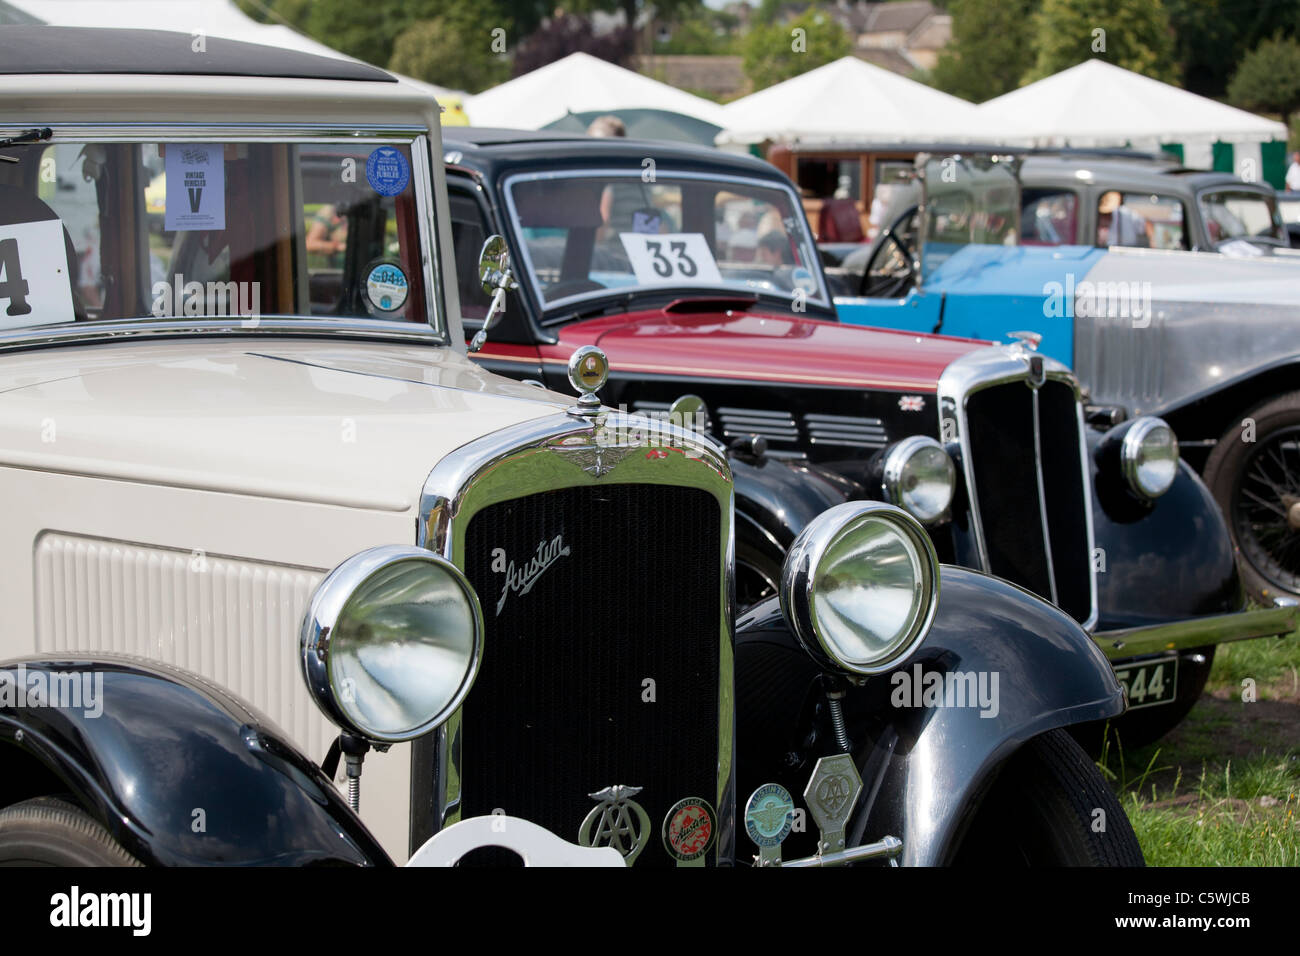 Vintage vehicle display at the Bakewell Show, Bakewell, Derbyshire, England,UK Stock Photo